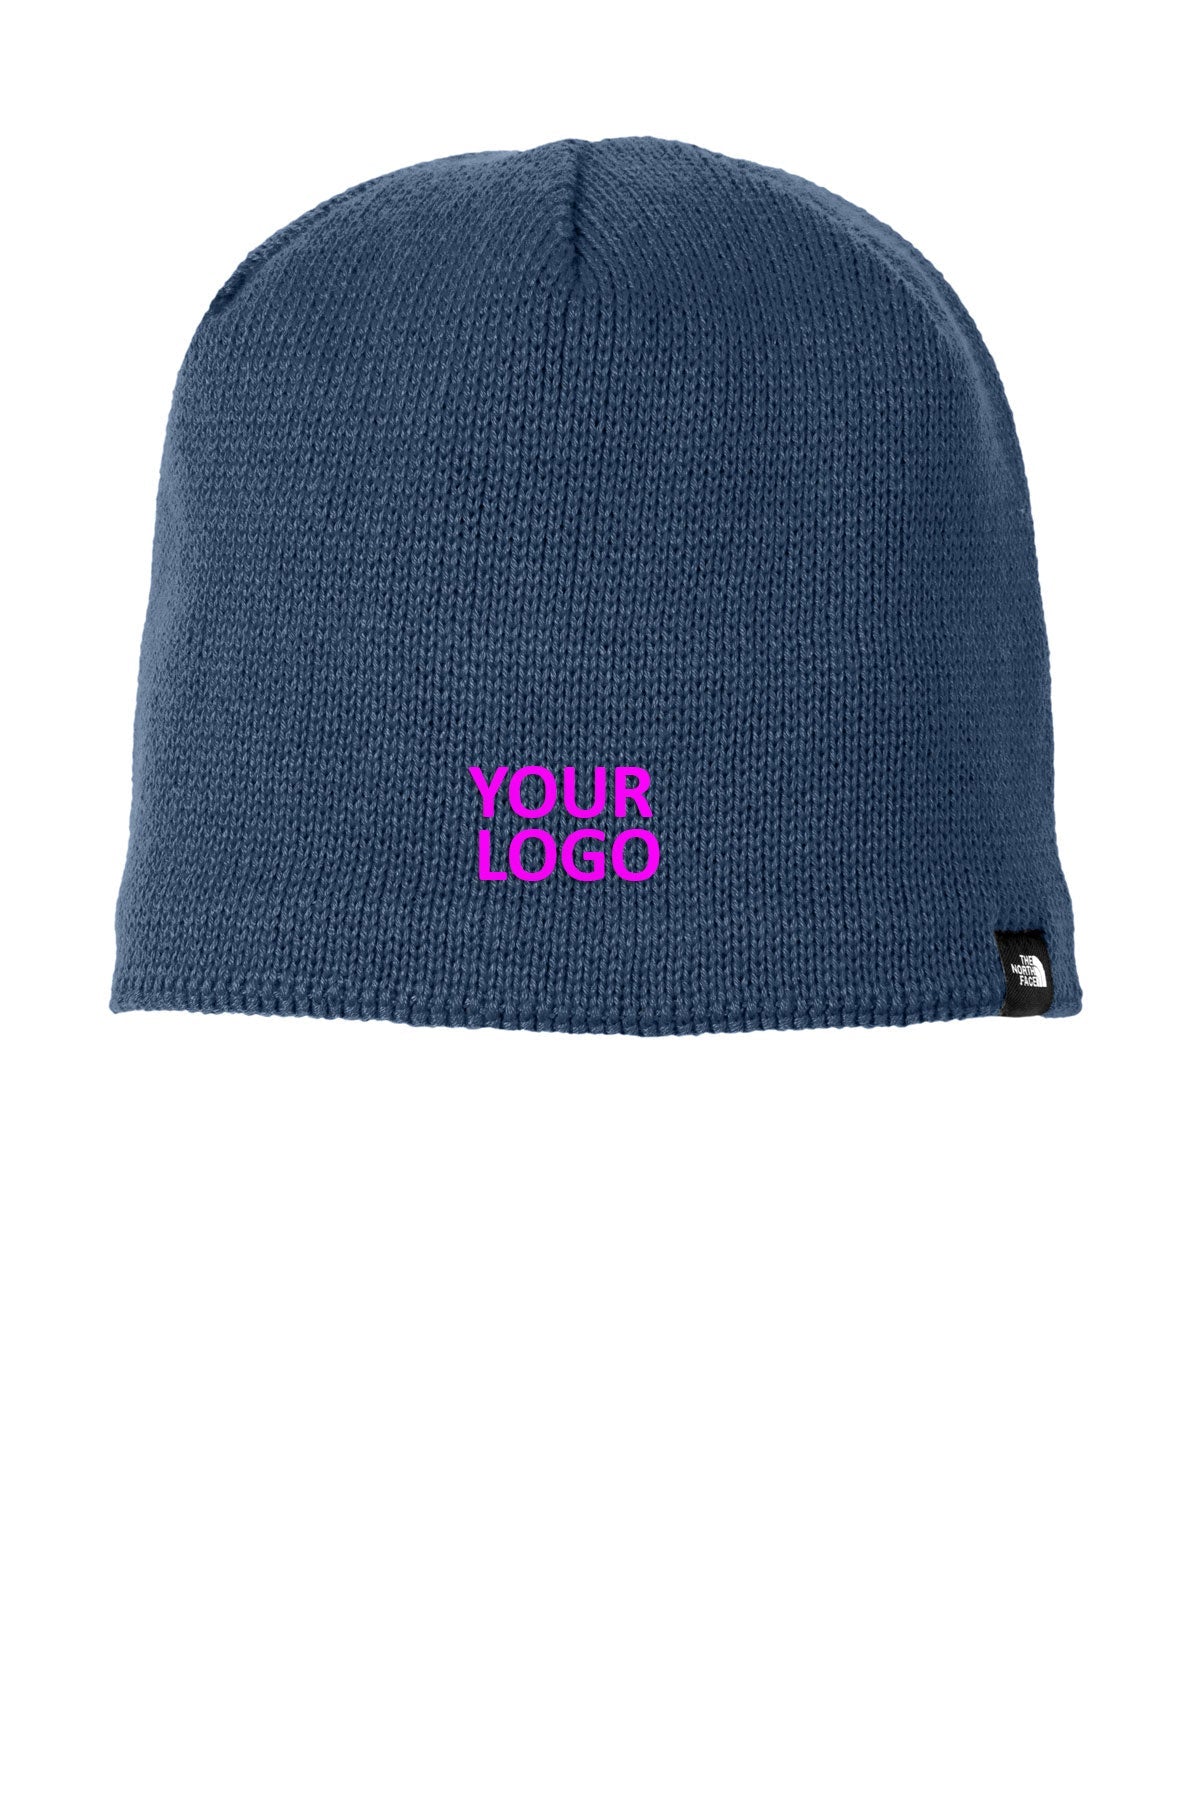 The North Face Blue Wing NF0A4VUB The-North-Face-Mountain-Beanie-NF0A4VUB-Blue-Wing